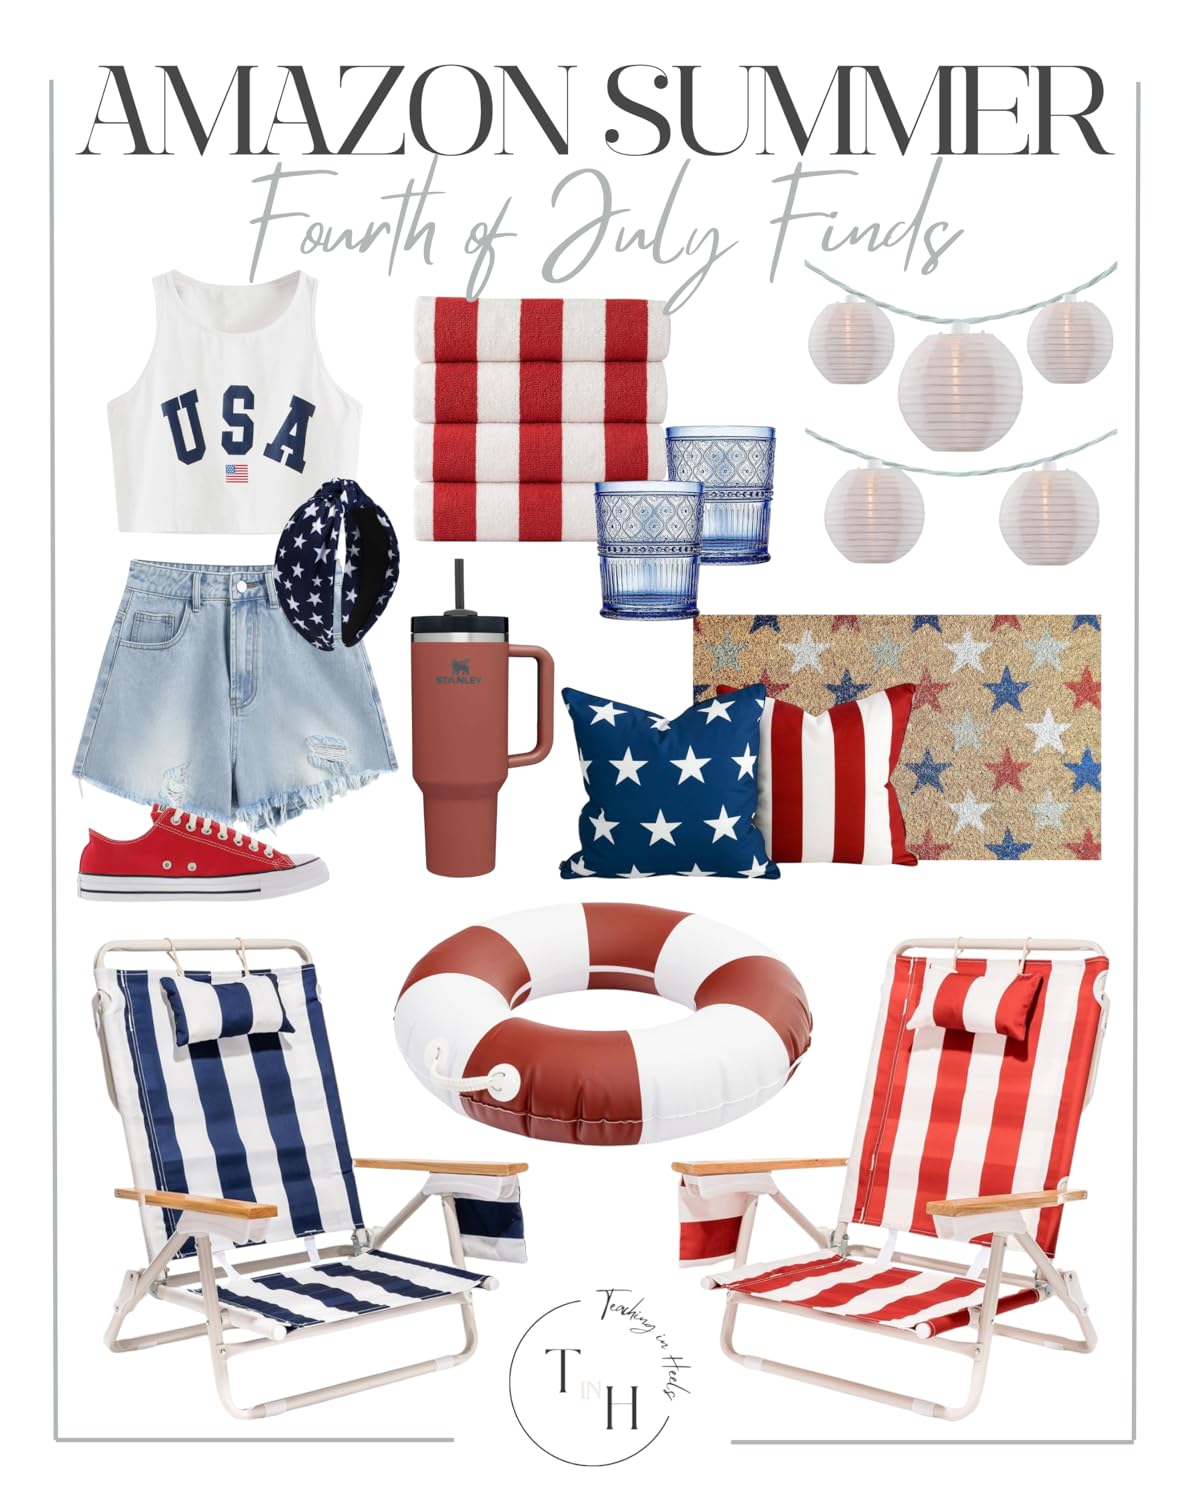 4th of July Style Guide: Must-Have Outfits & Essentials

fourth of july, summer, summer outfit, summer fashion, outdoor hosting, home, home essentials, outdoor furniture